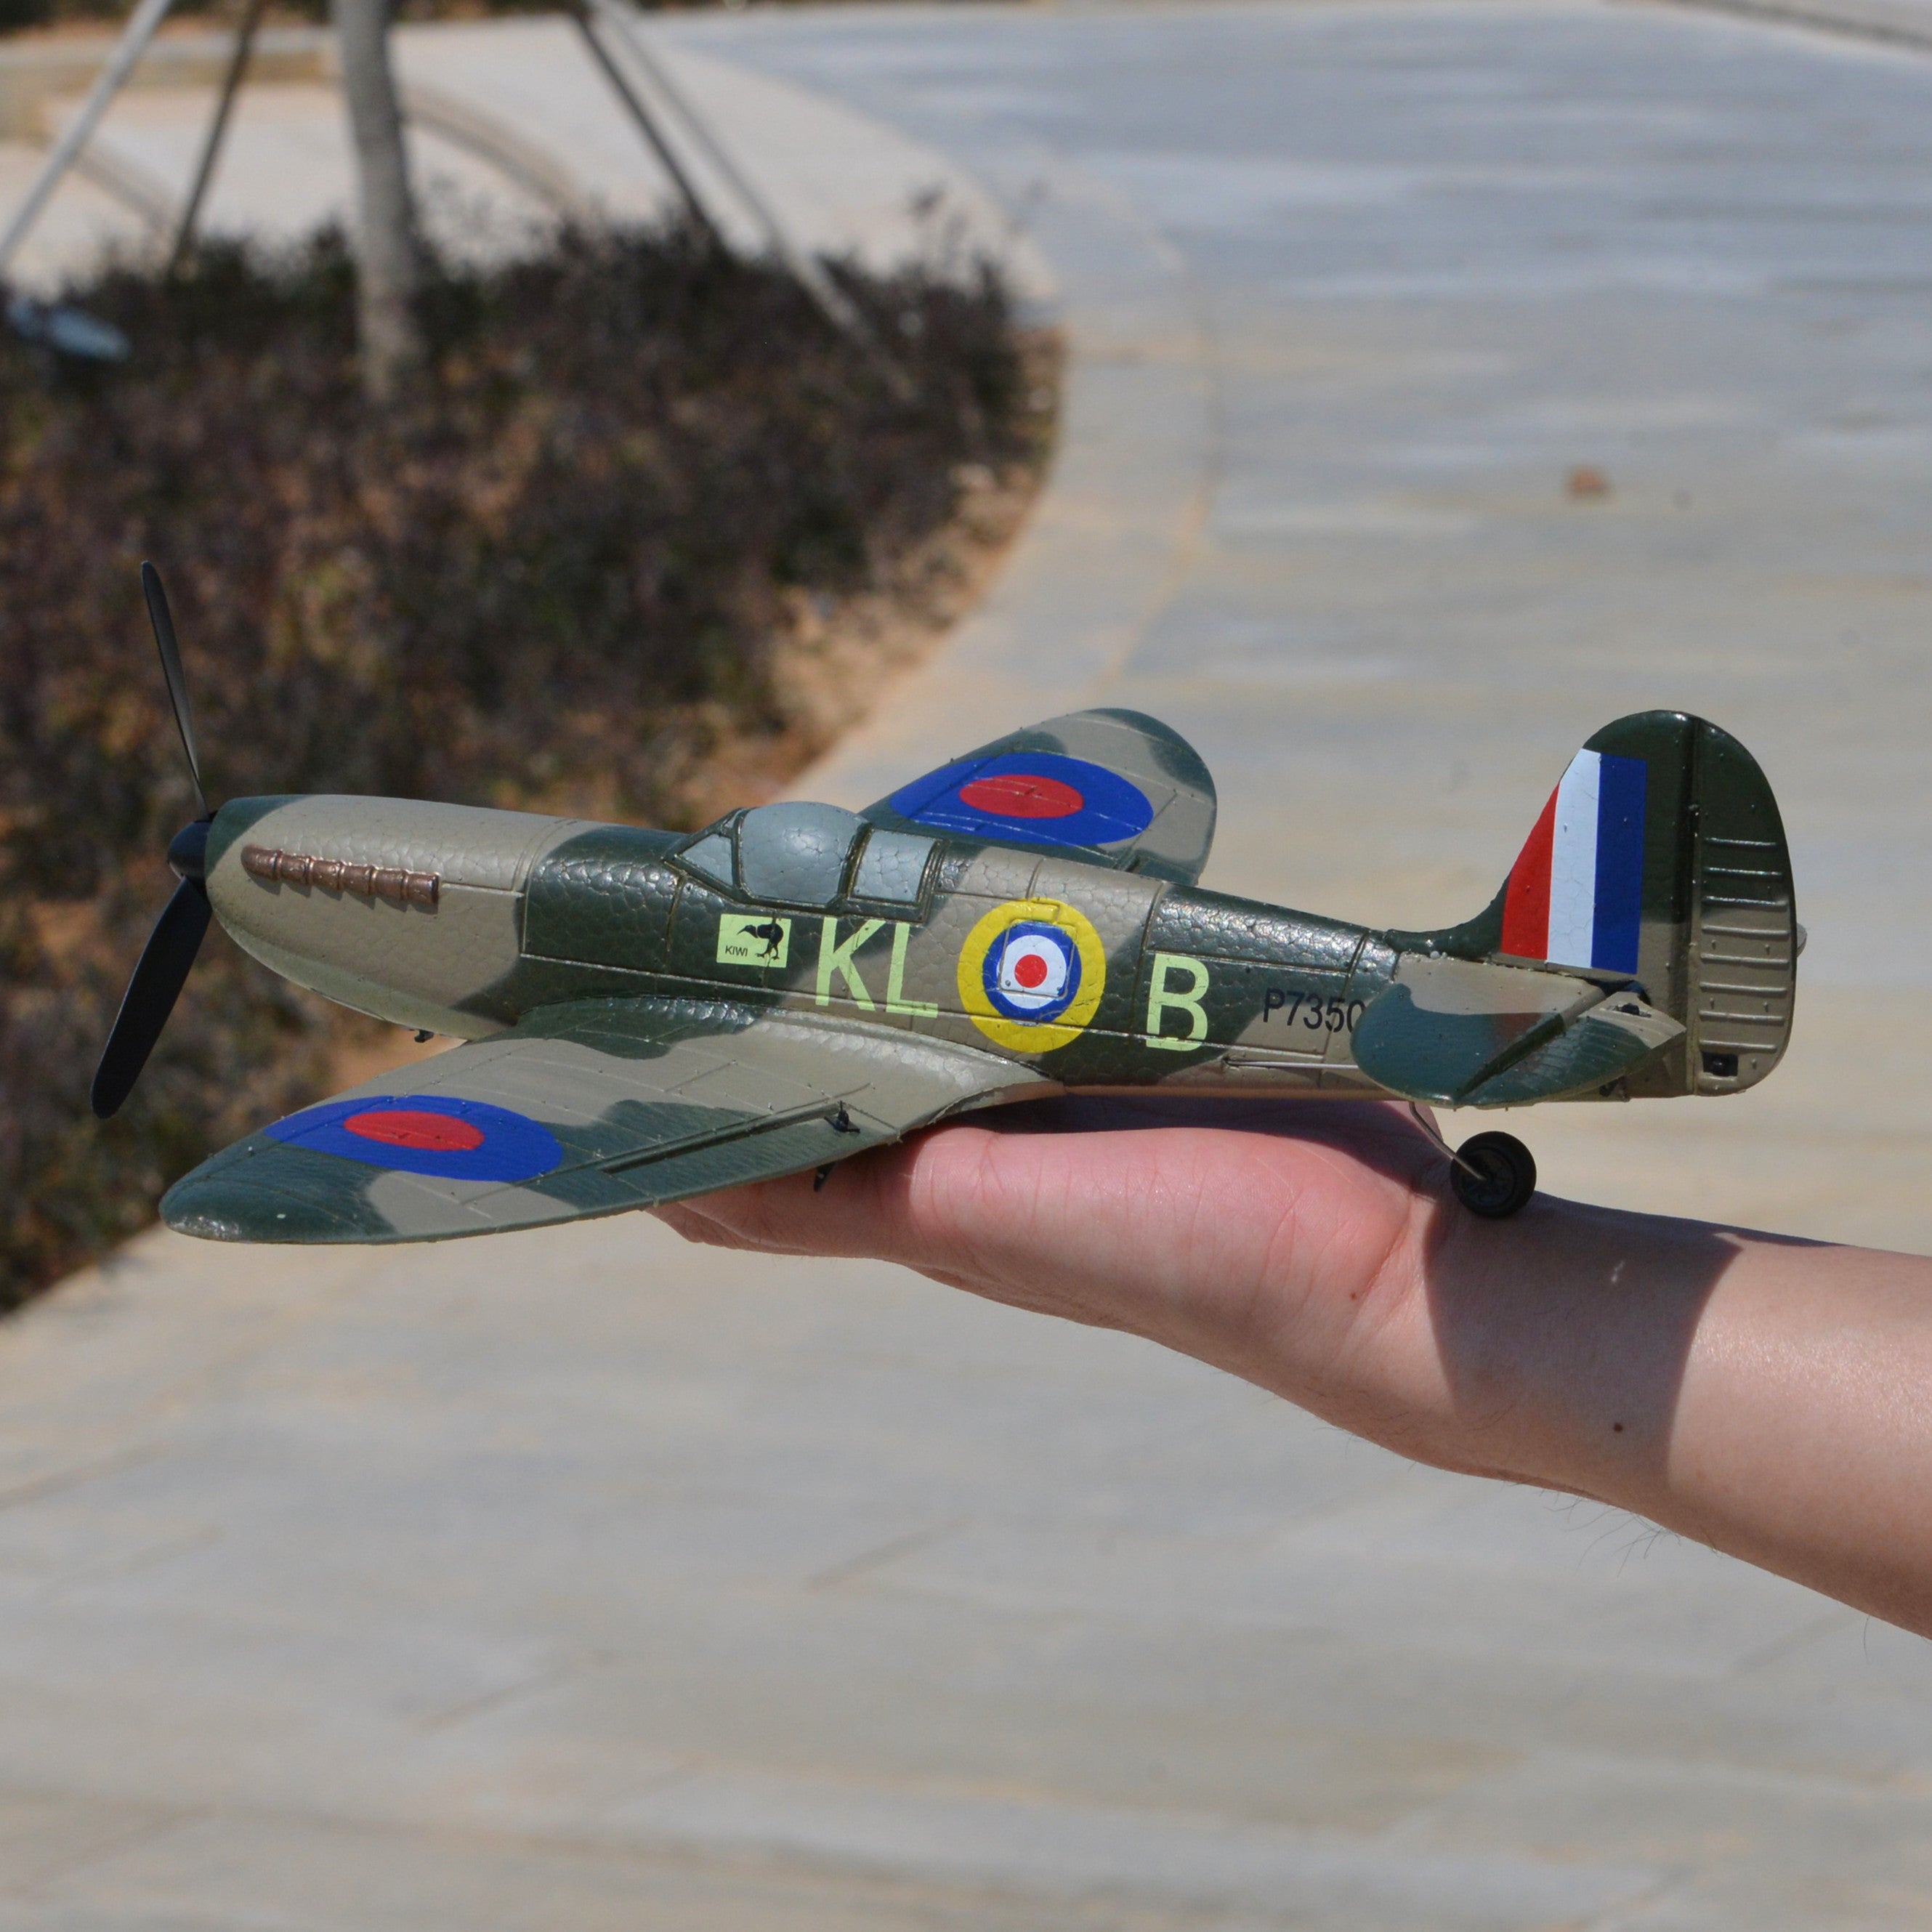 To Learn About the Spitfire